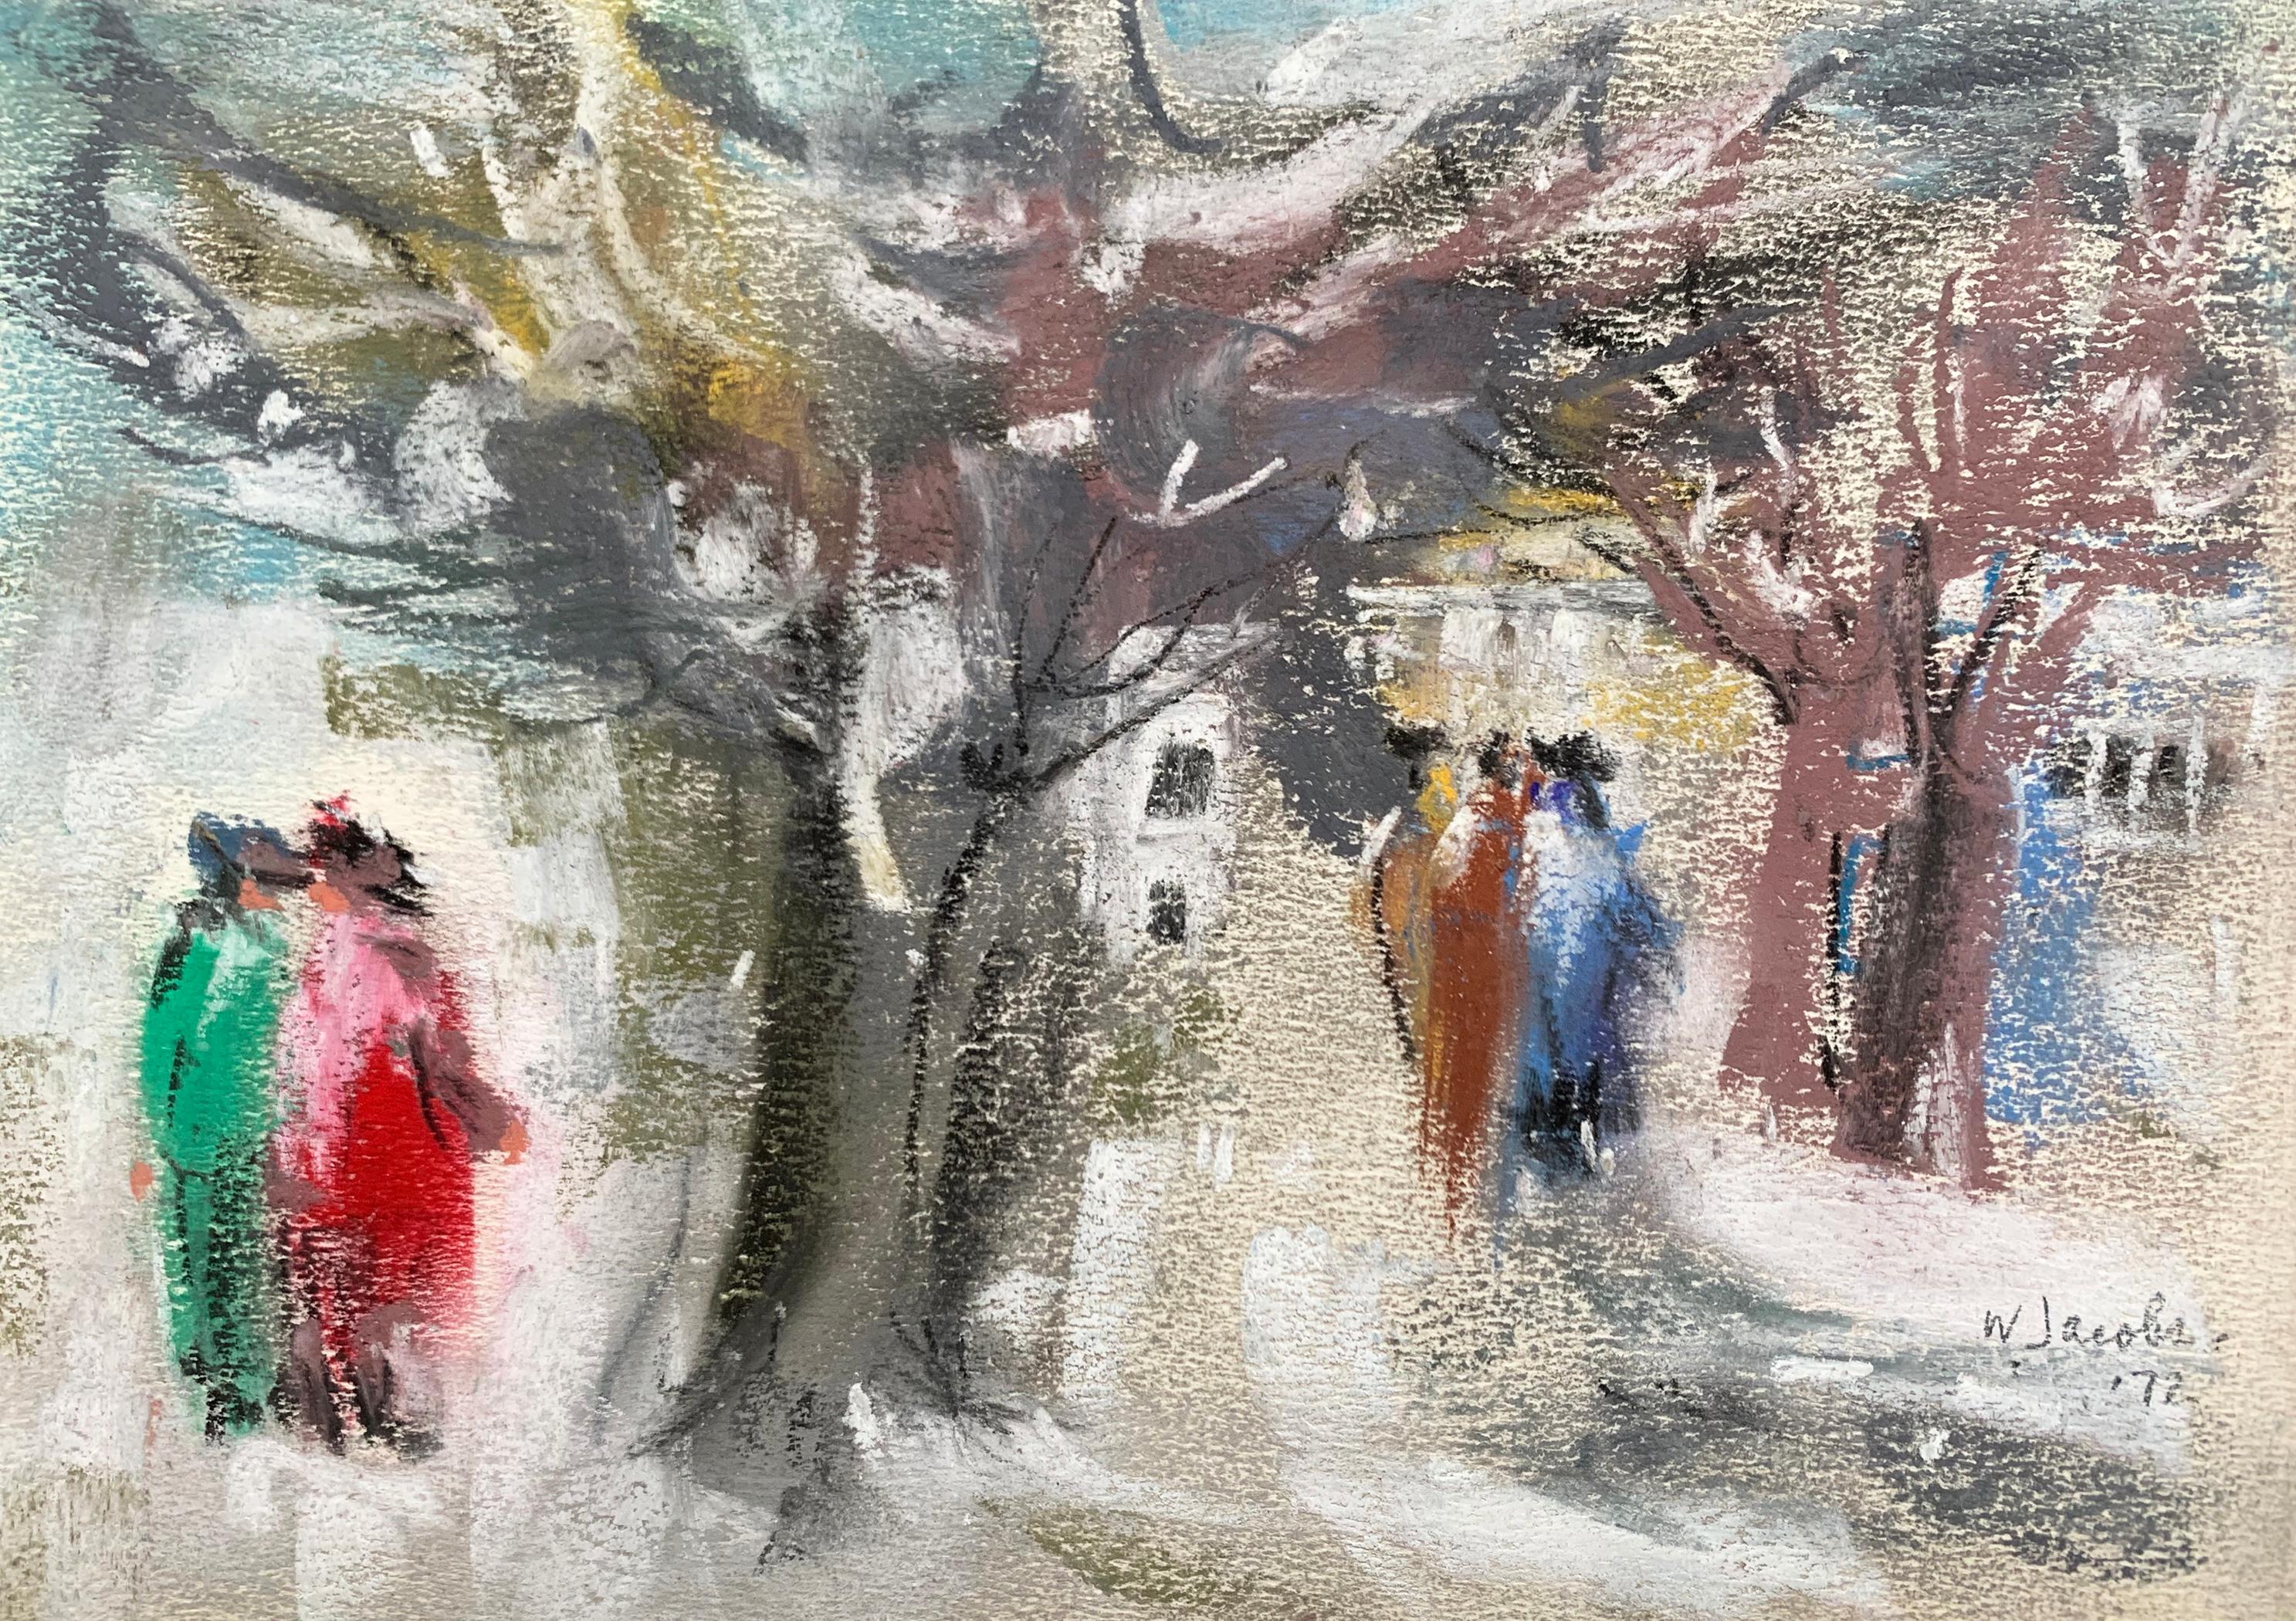 William Jacobs "A Stroll in the Park", original pastel on paper